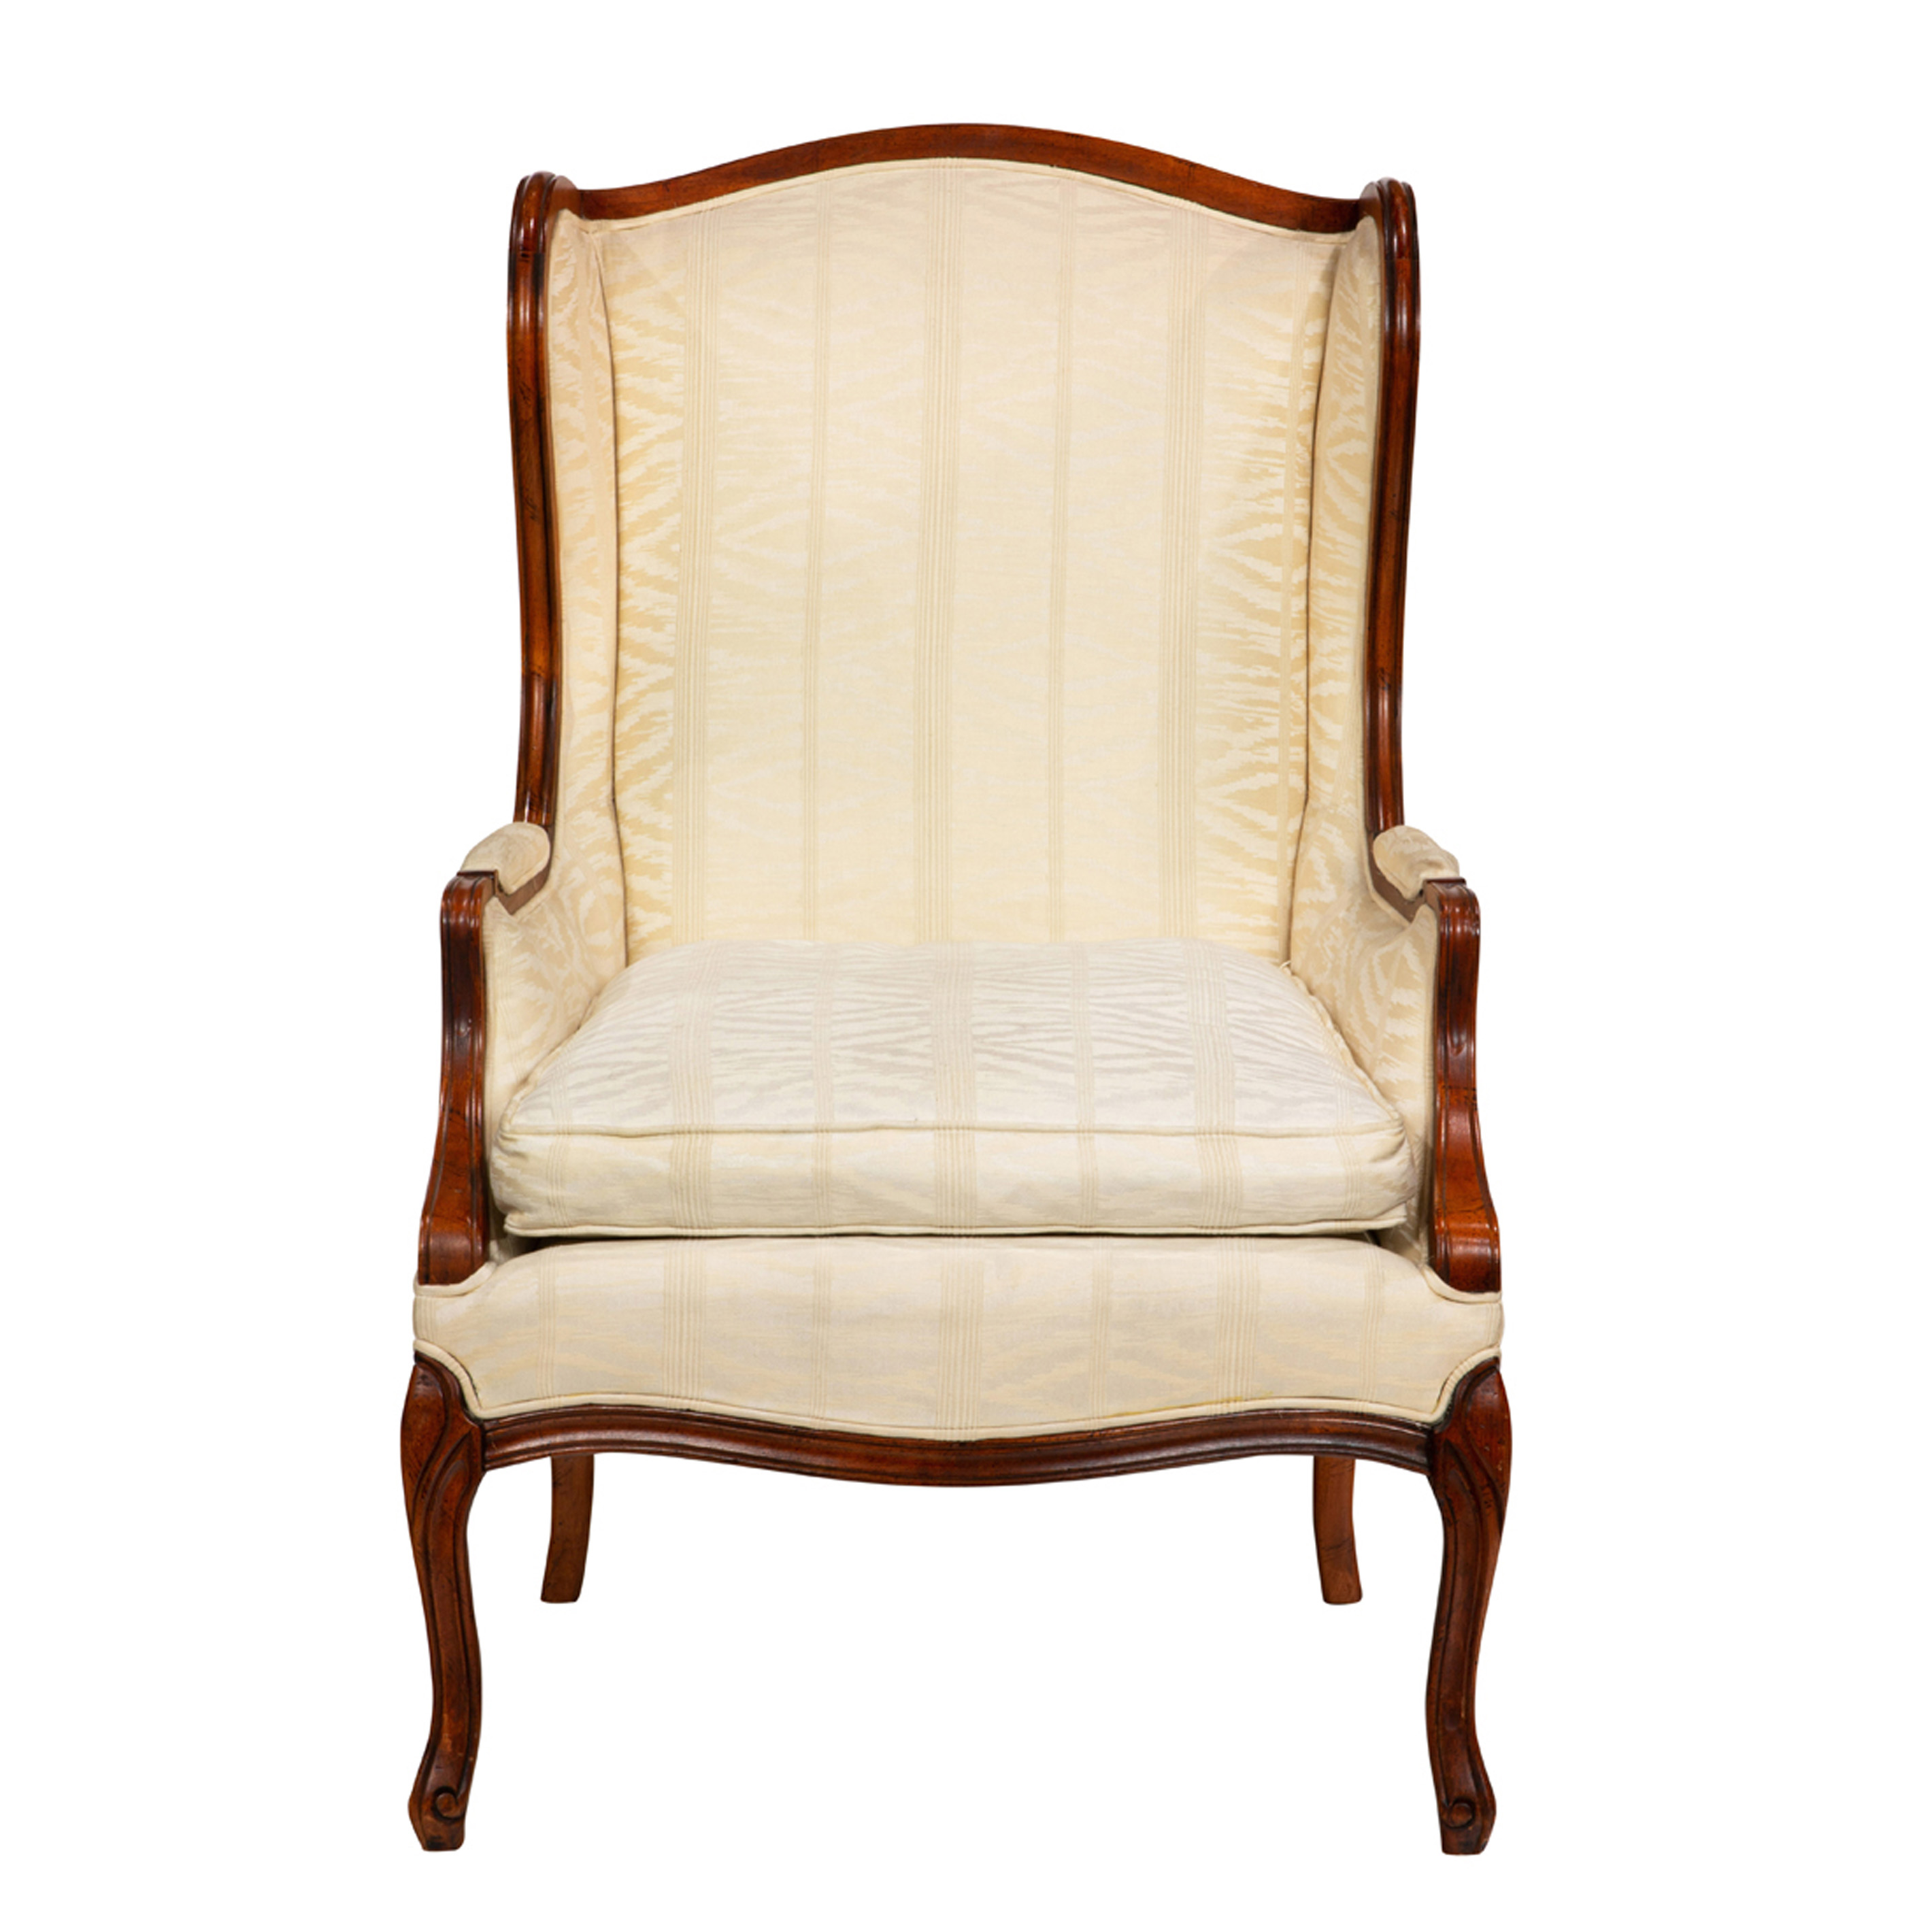 A QUEEN ANNE STYLE WING BACK ARMCHAIR 3a3d90